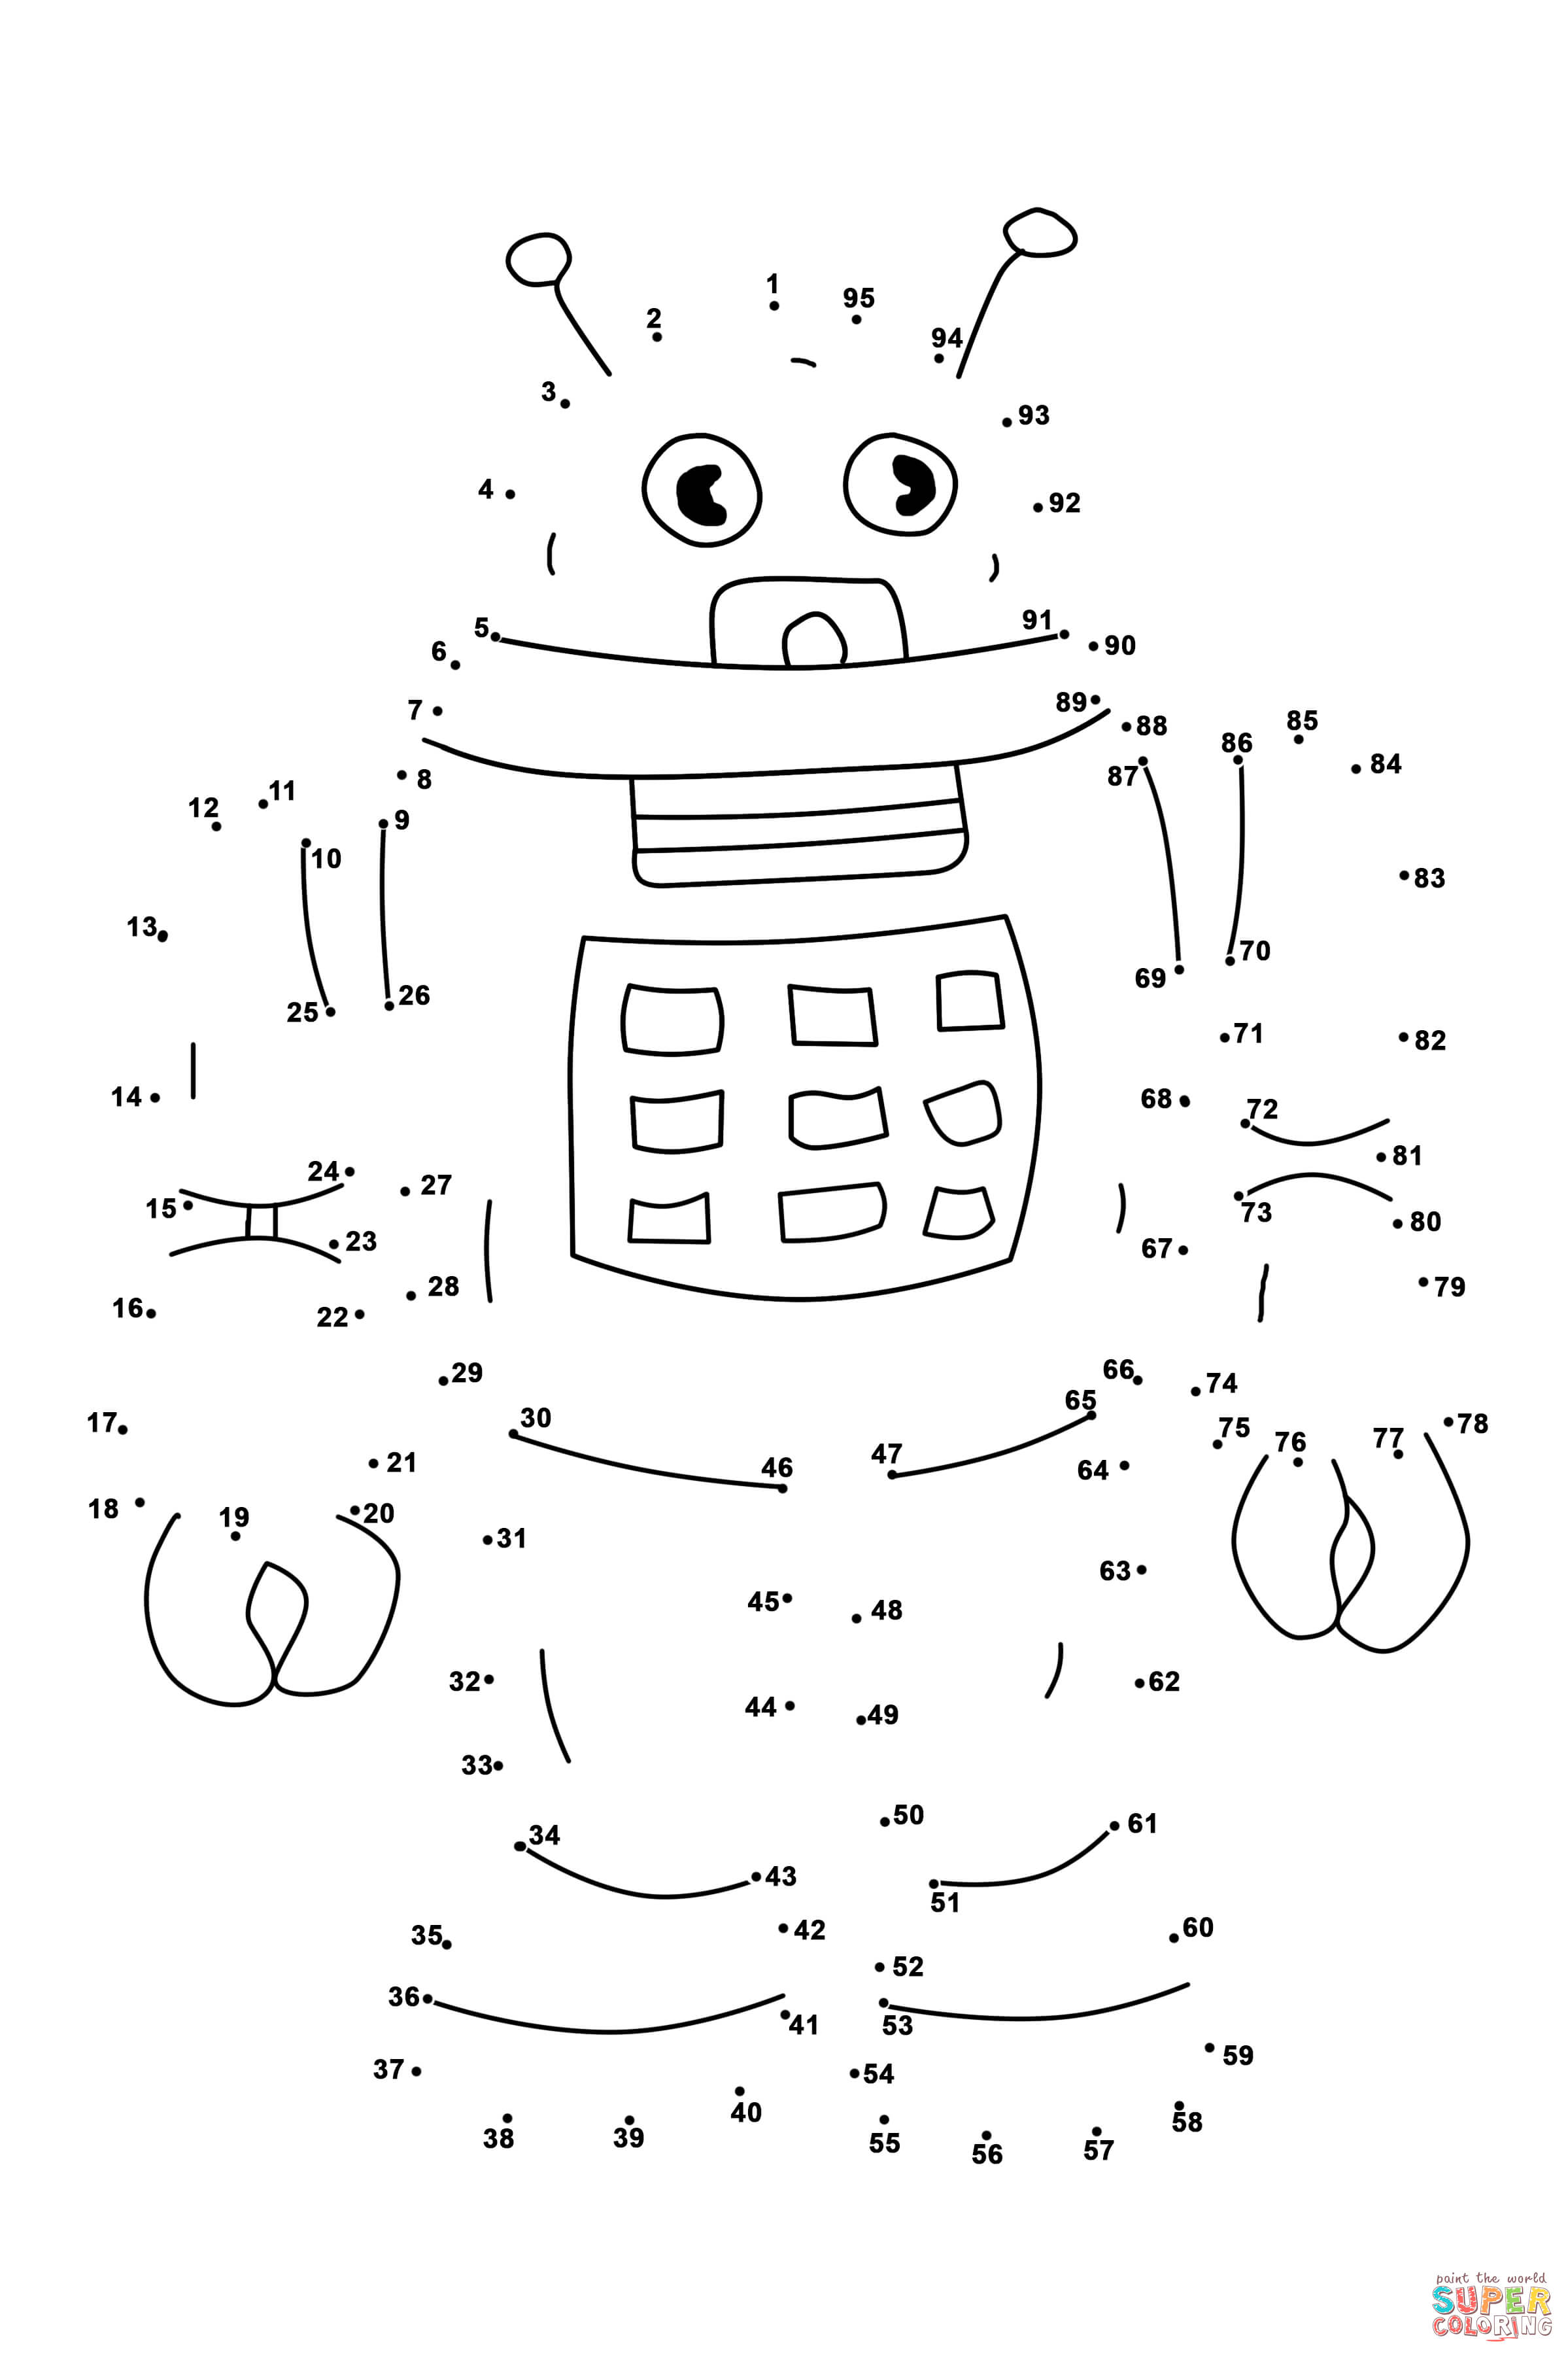 6-best-images-of-dot-to-dot-lego-printable-lego-star-wars-connect-the-dots-lego-dot-to-dot